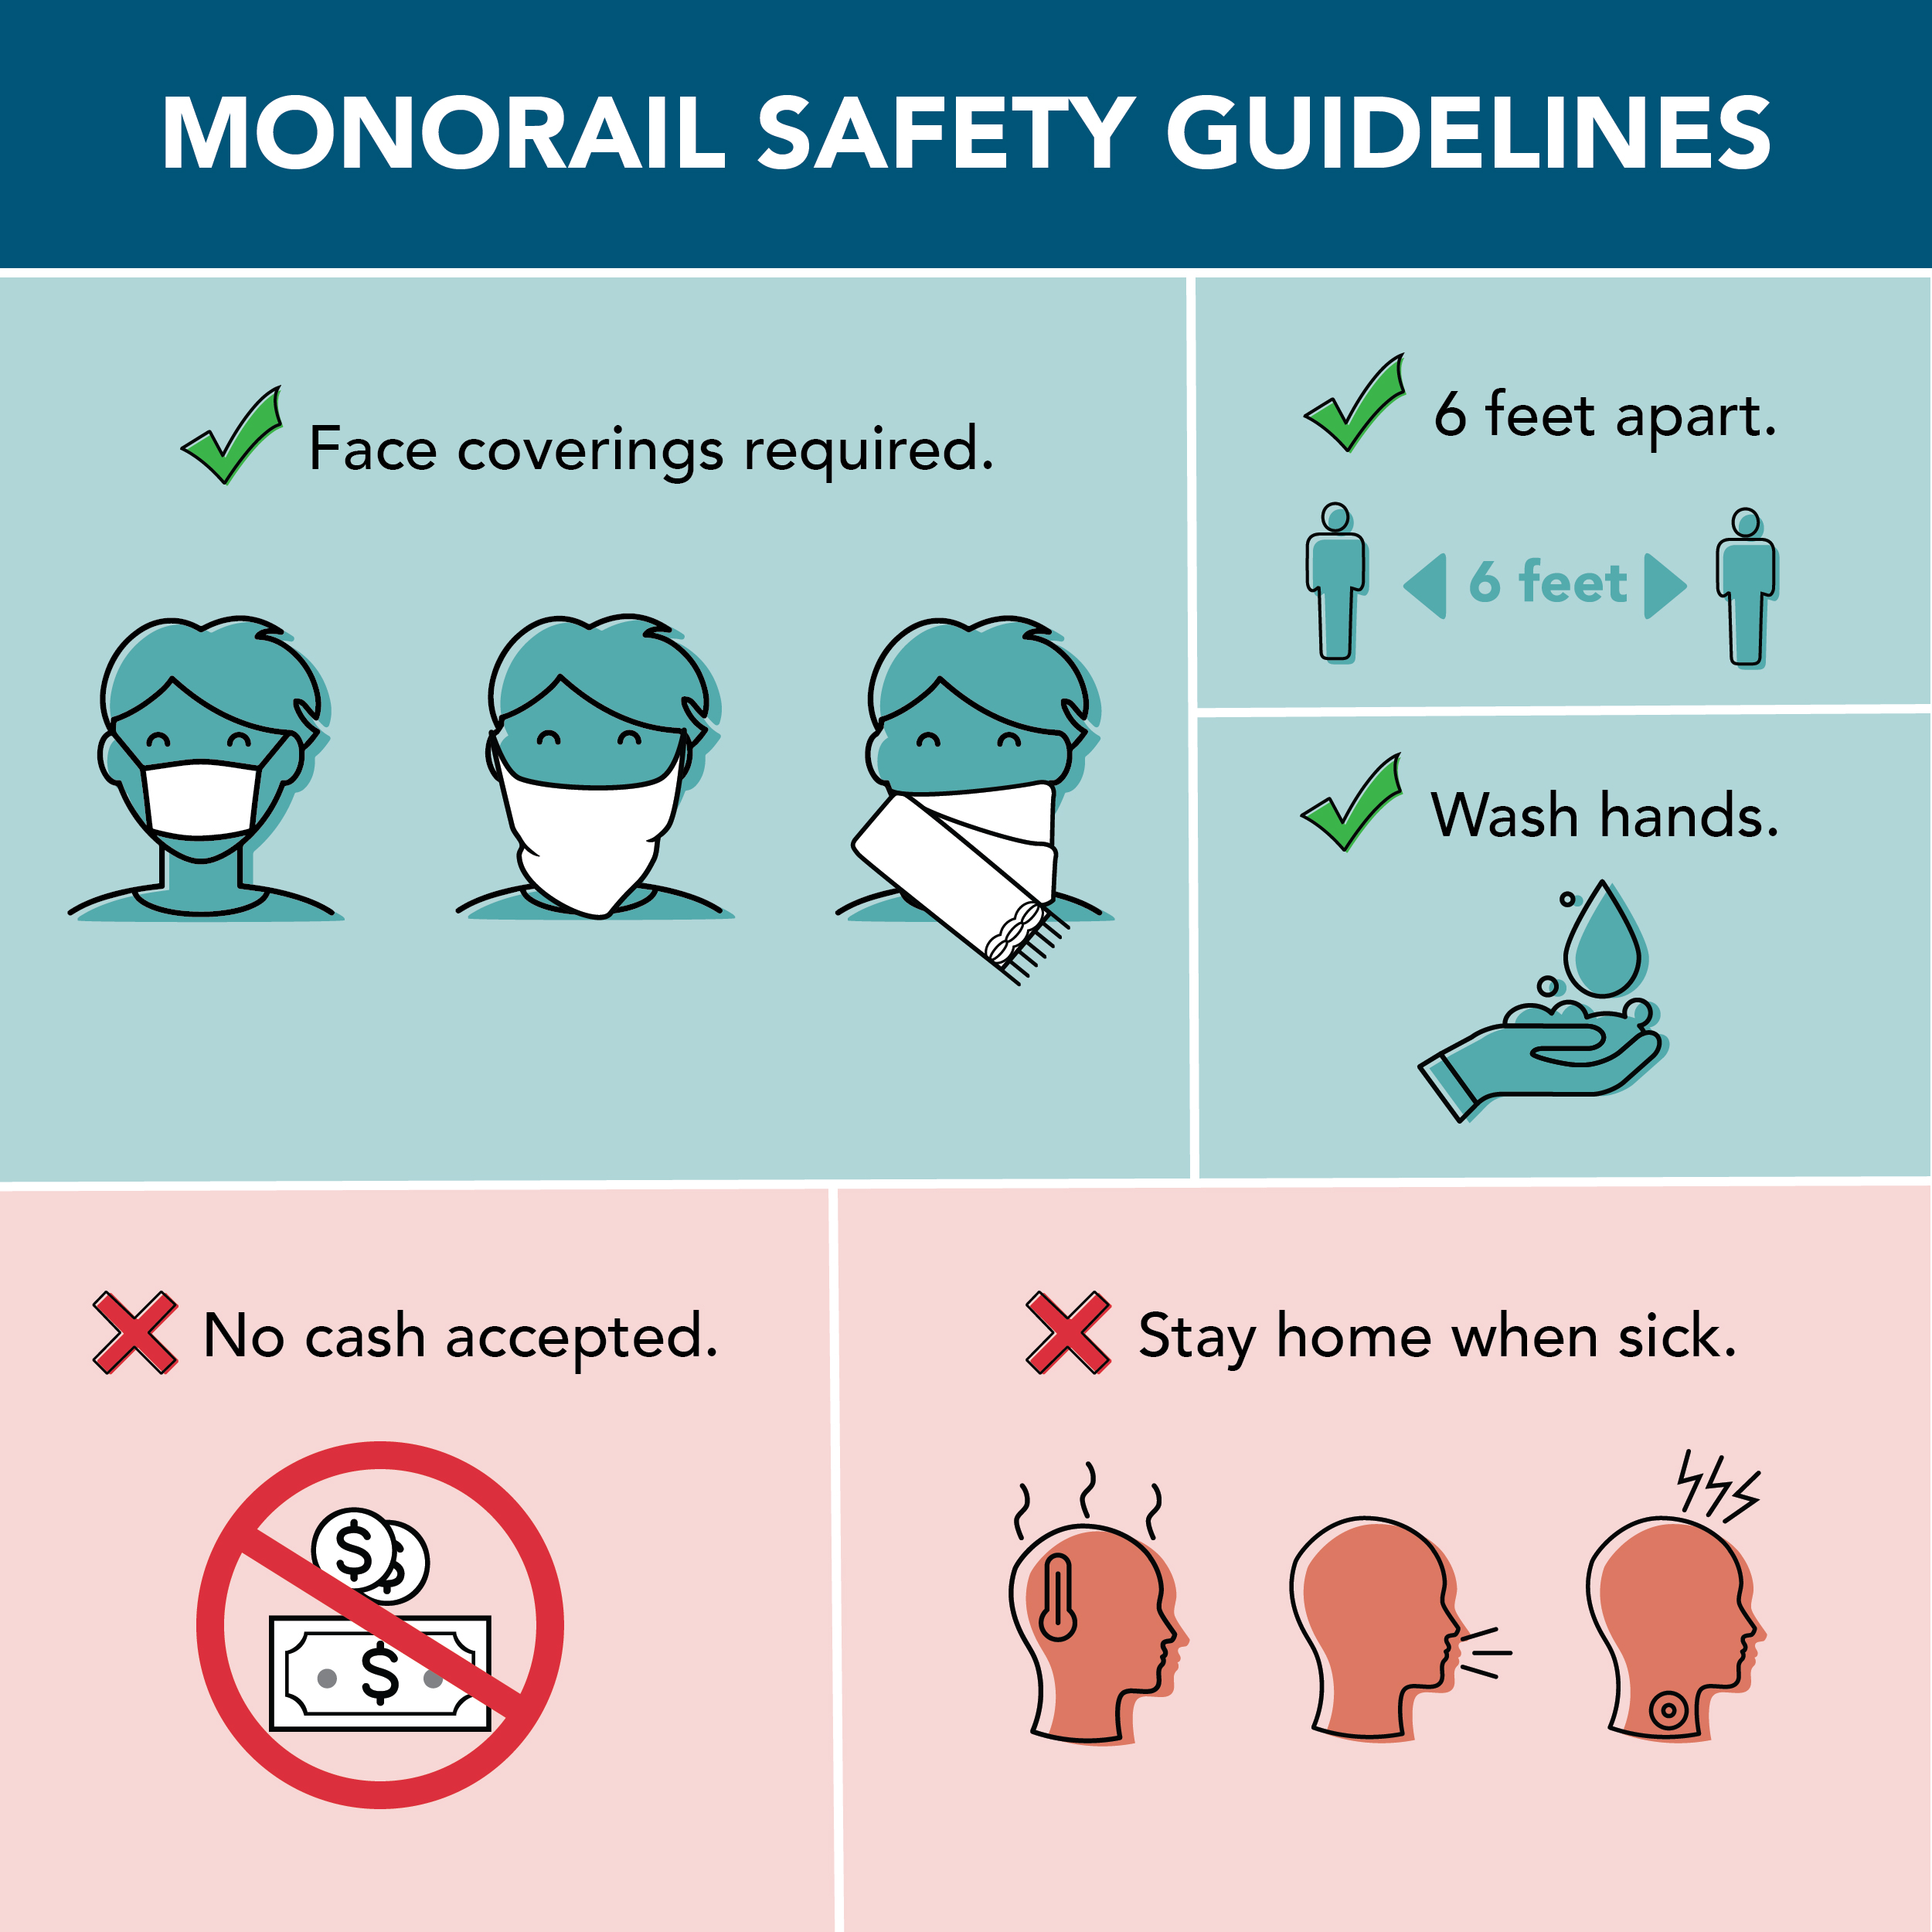 Monorail safety guidelines, face coverings required, stay 6 feet apart, wash hands, no cash accepted, stay home when sick